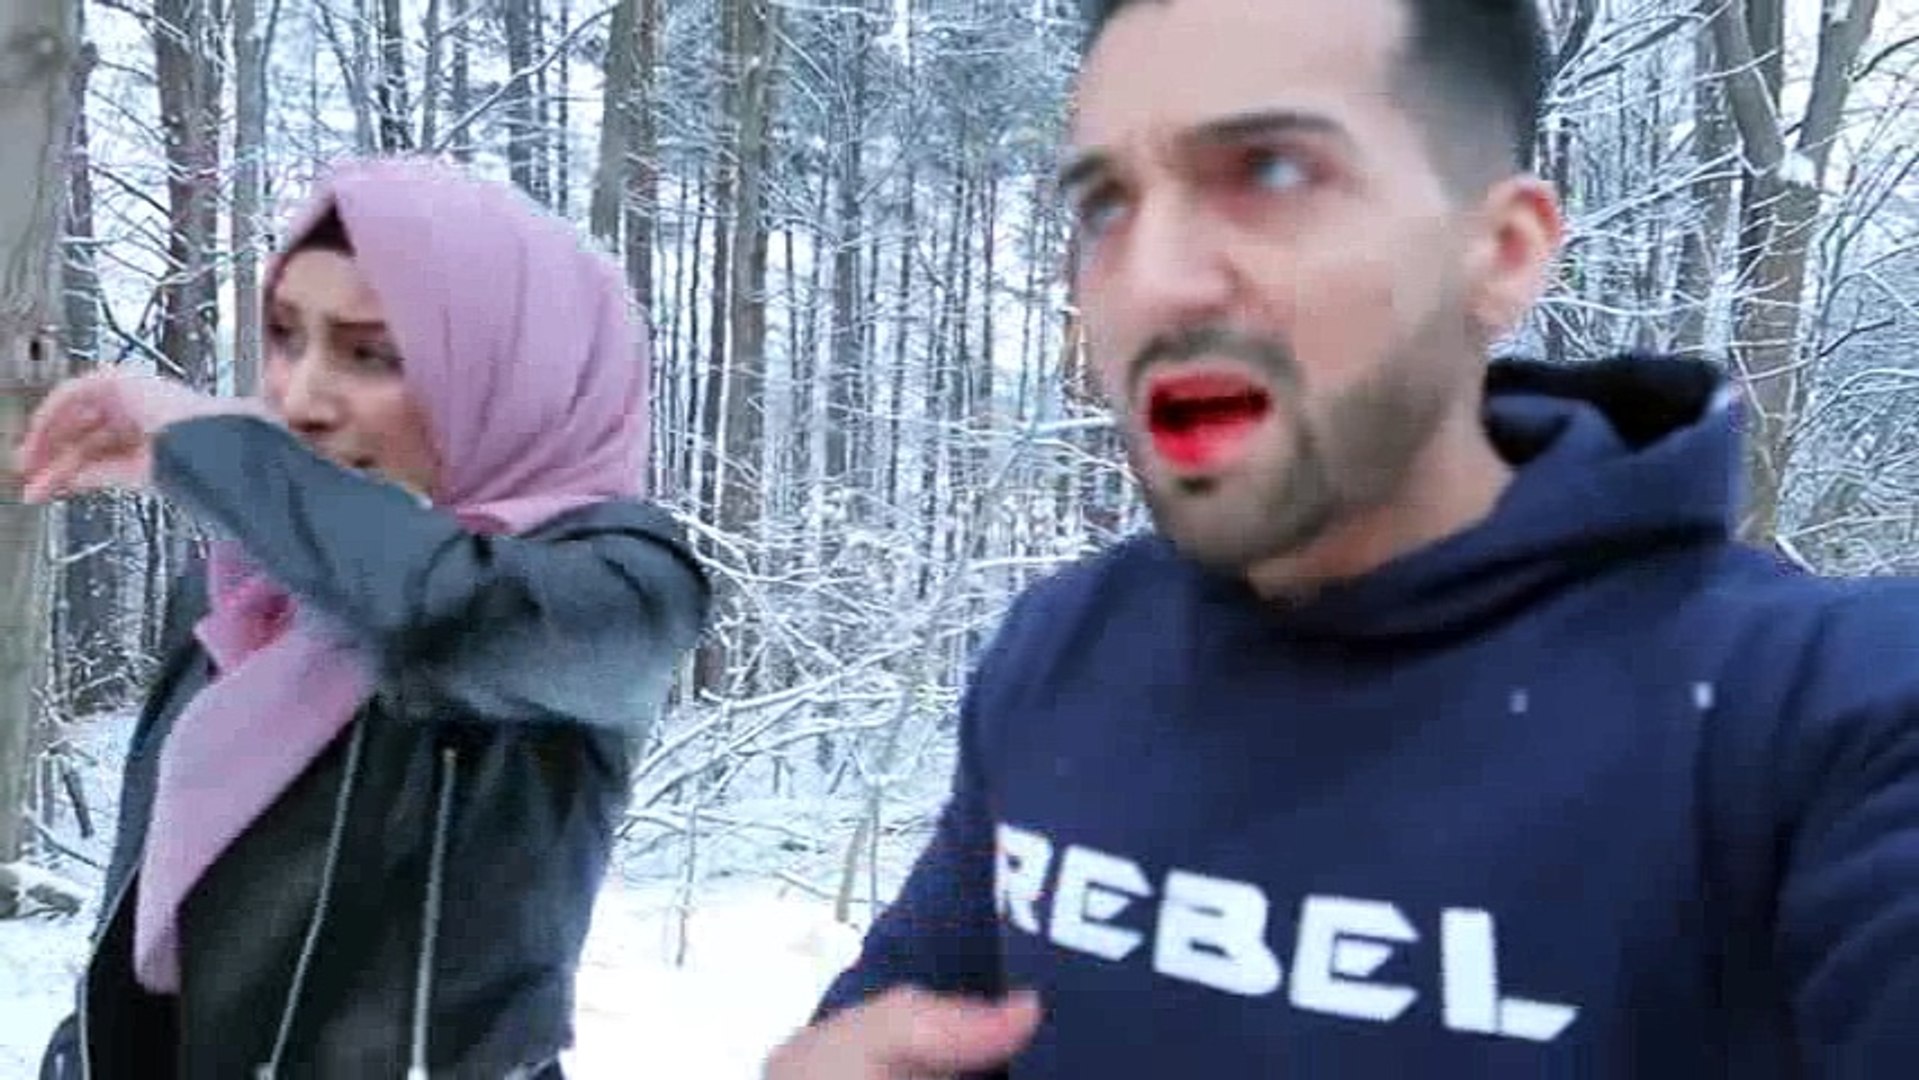 Sham Idrees badly injured in roadside accident. Prayers needed - video  Dailymotion